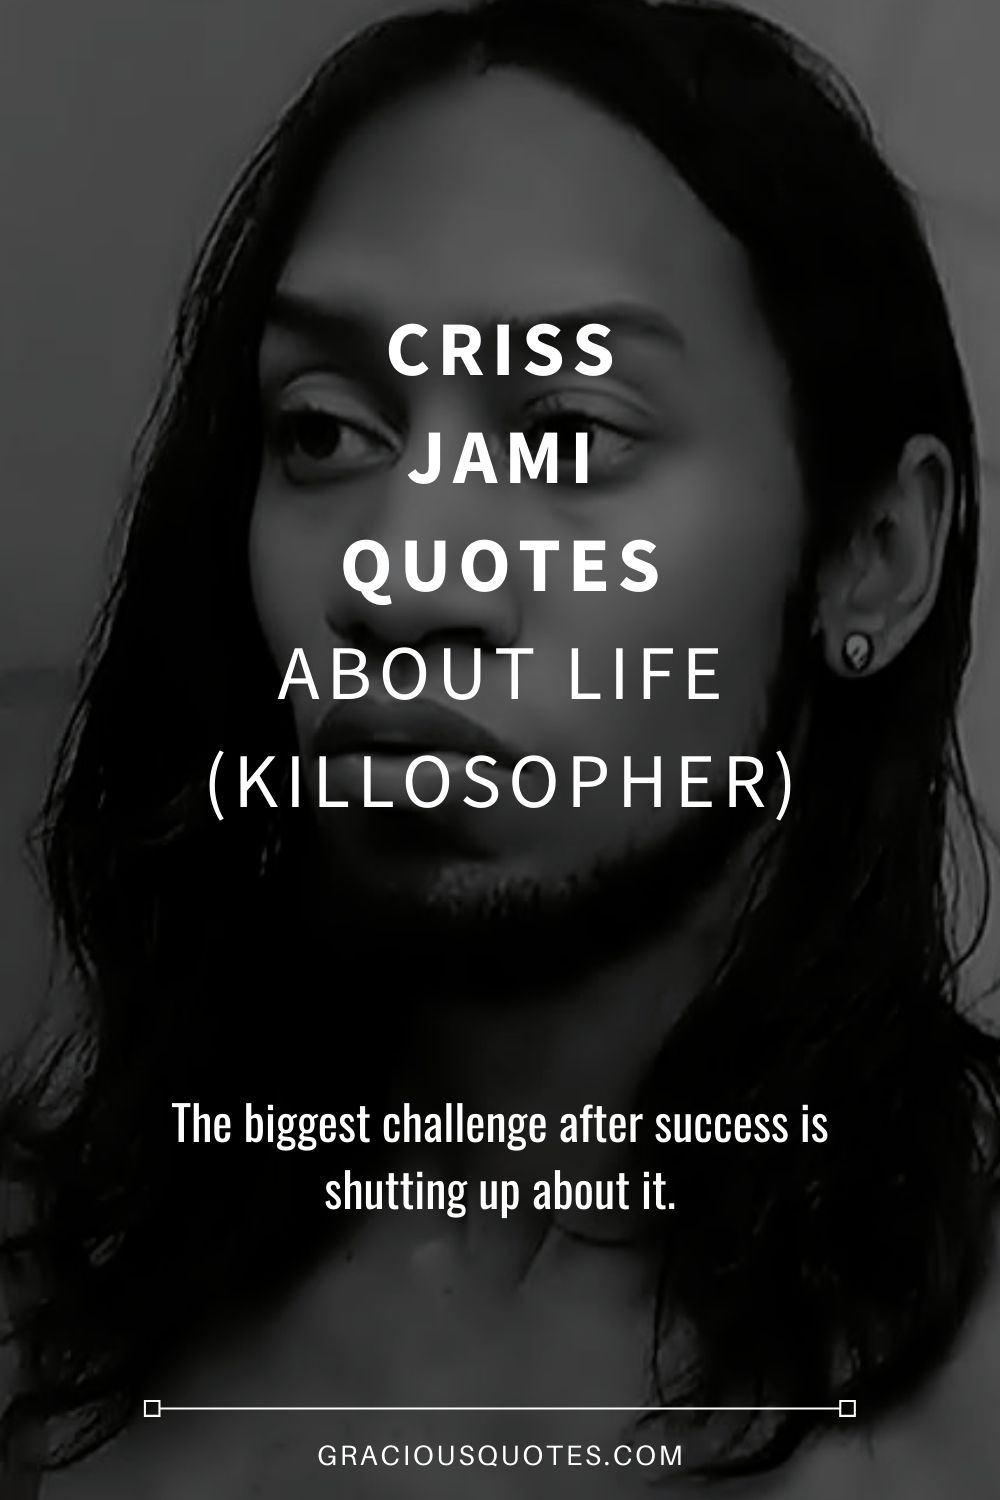 Criss Jami Quotes About Life (KILLOSOPHER) - Gracious Quotes